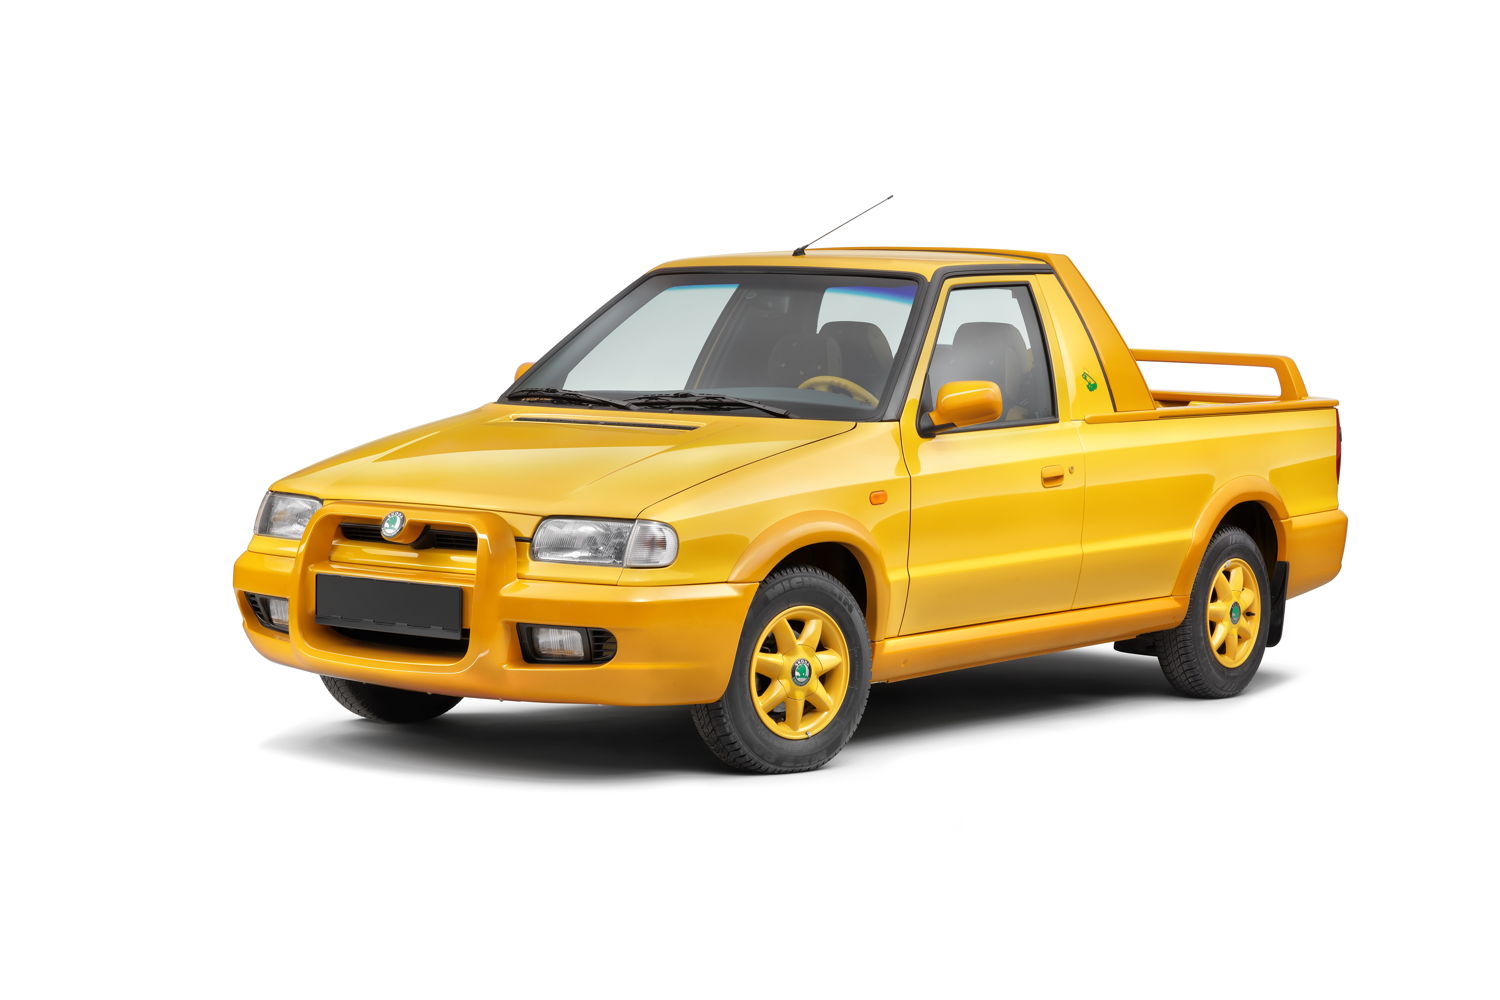 The ŠKODA FELICIA Fun was a vehicle for young and young-at-heart customers as well as amateur sports enthusiasts. The features and the bright colour scheme emphasised this. The 60-millimetre higher chassis made detours on unpaved roads a breeze.